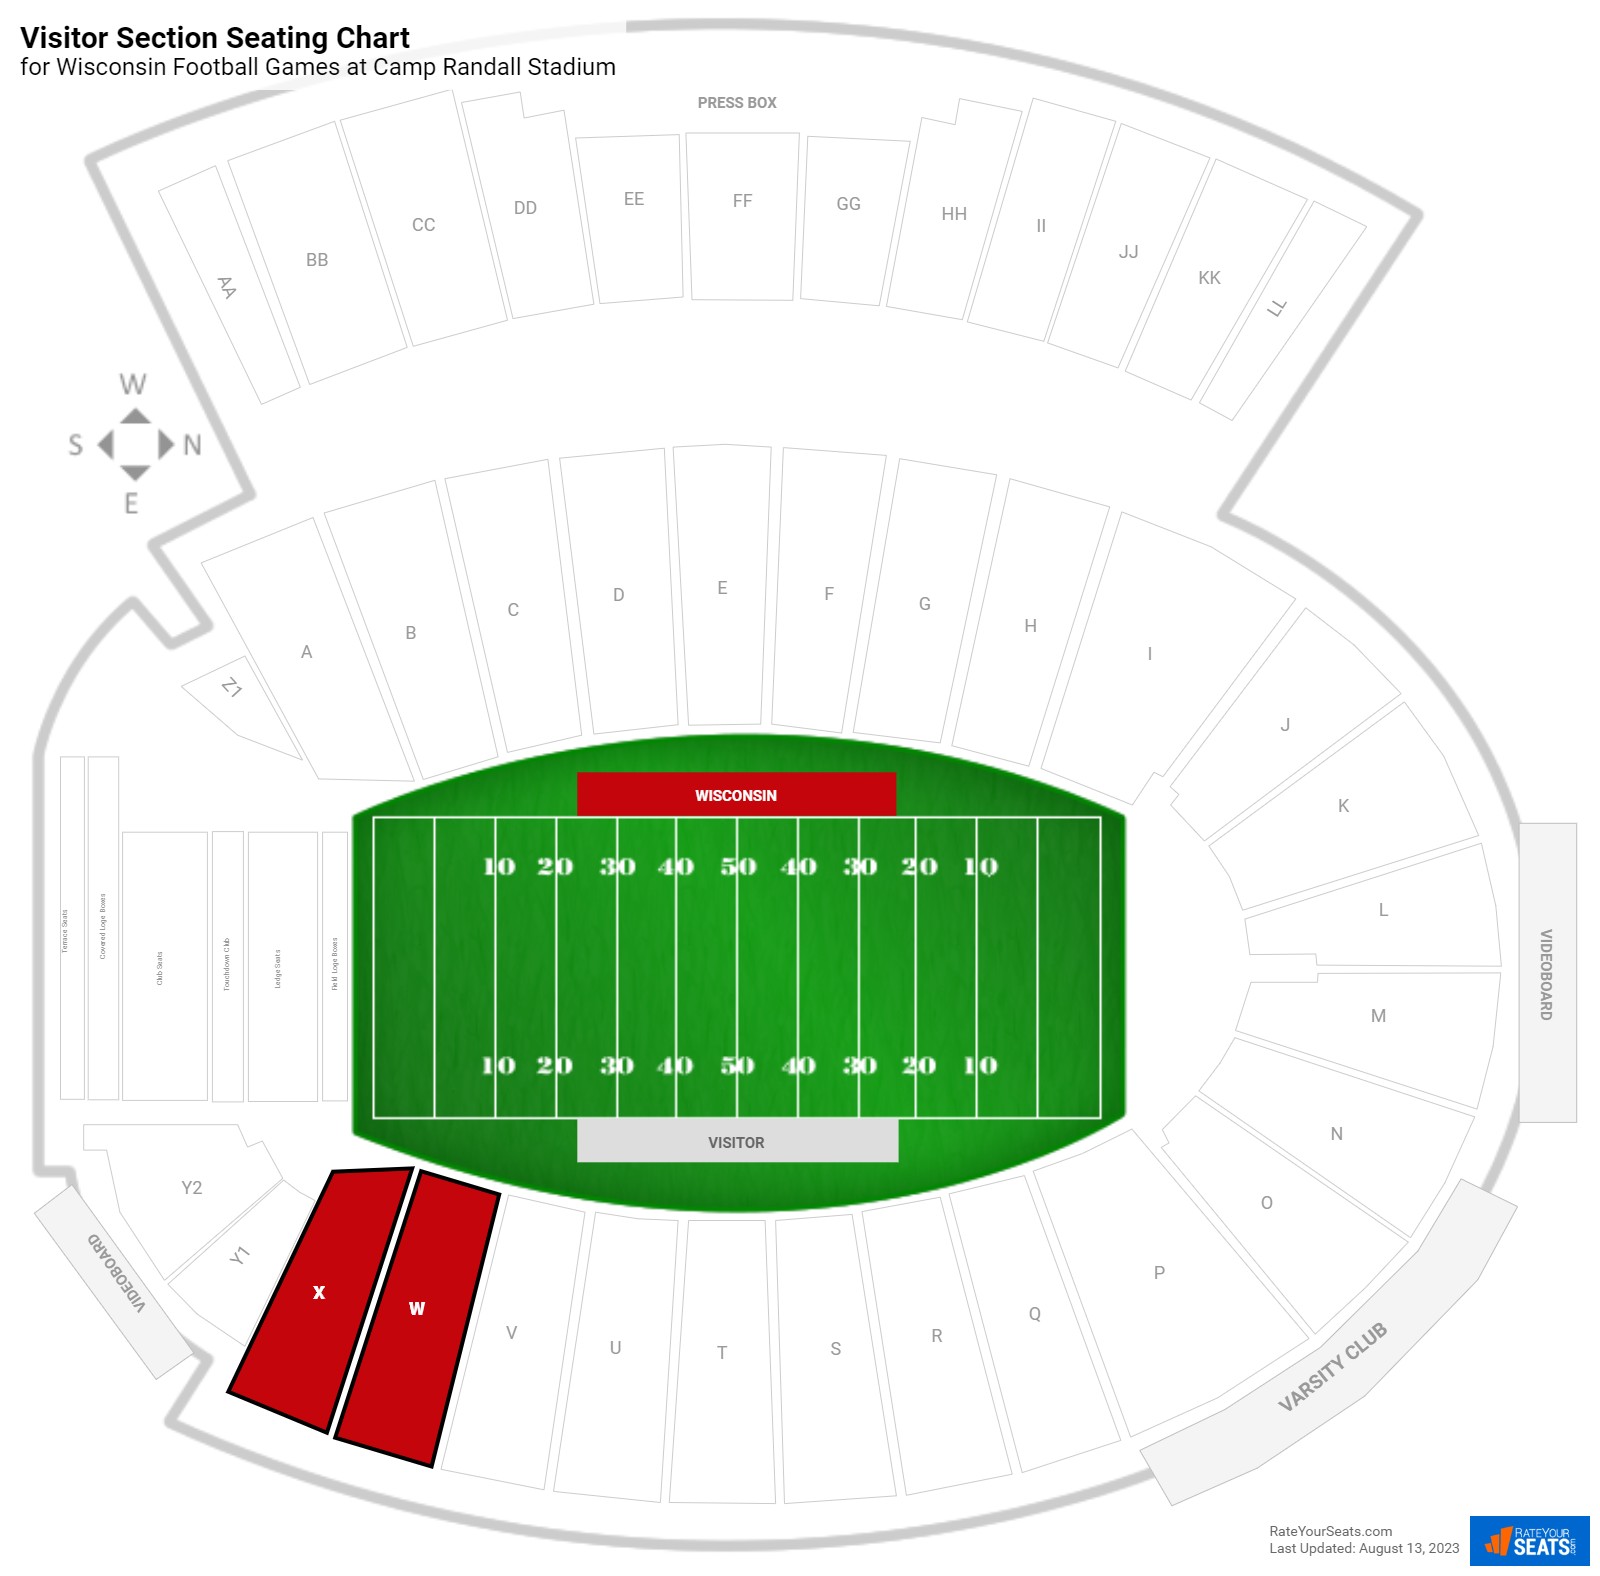 Wisconsin Visitor Section Seating Chart at Camp Randall Stadium